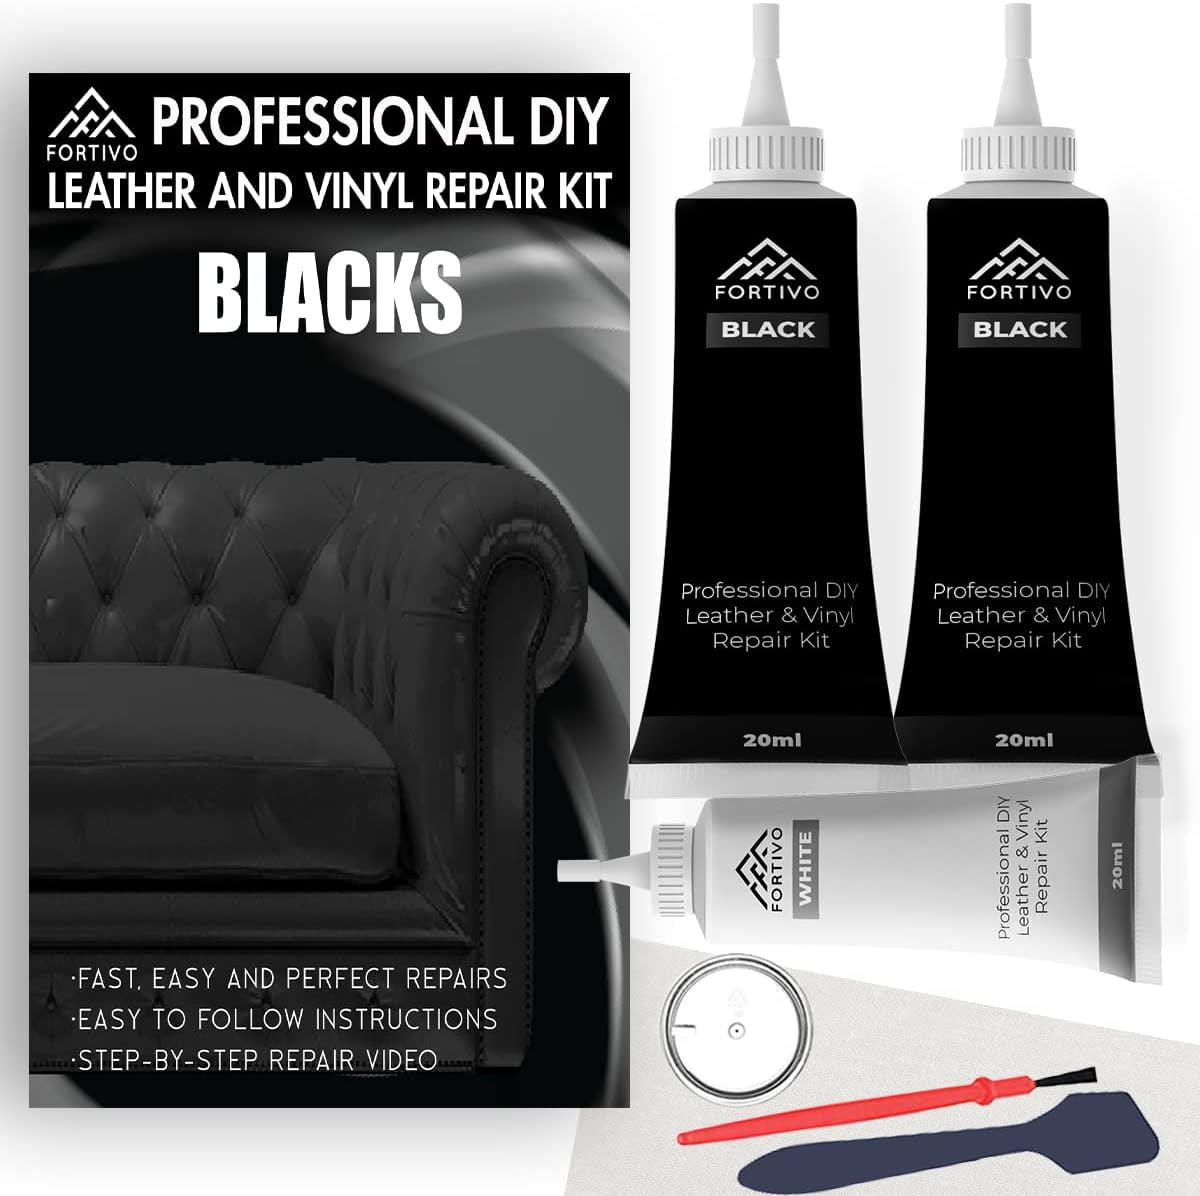 FORTIVO Black Leather and Vinyl Repair Kit - Furniture, Couch, Car Seats, Sofa, Jacket